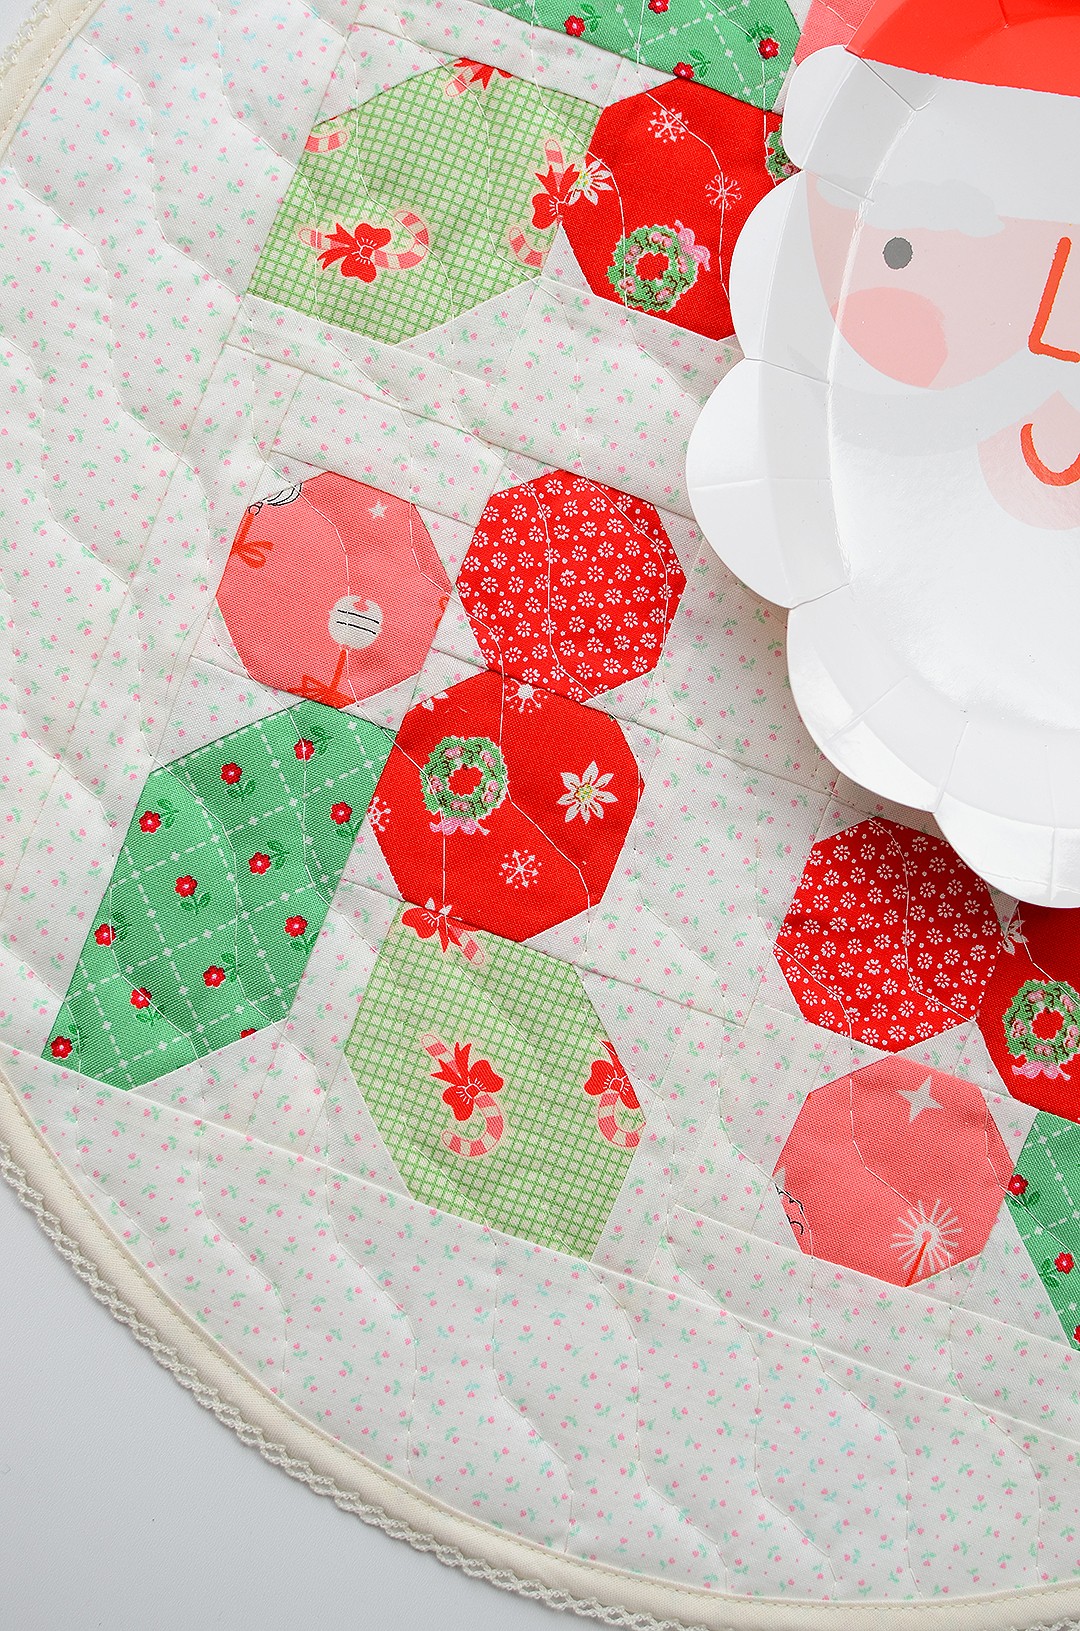 Holly Berry table topper - a free tutorial